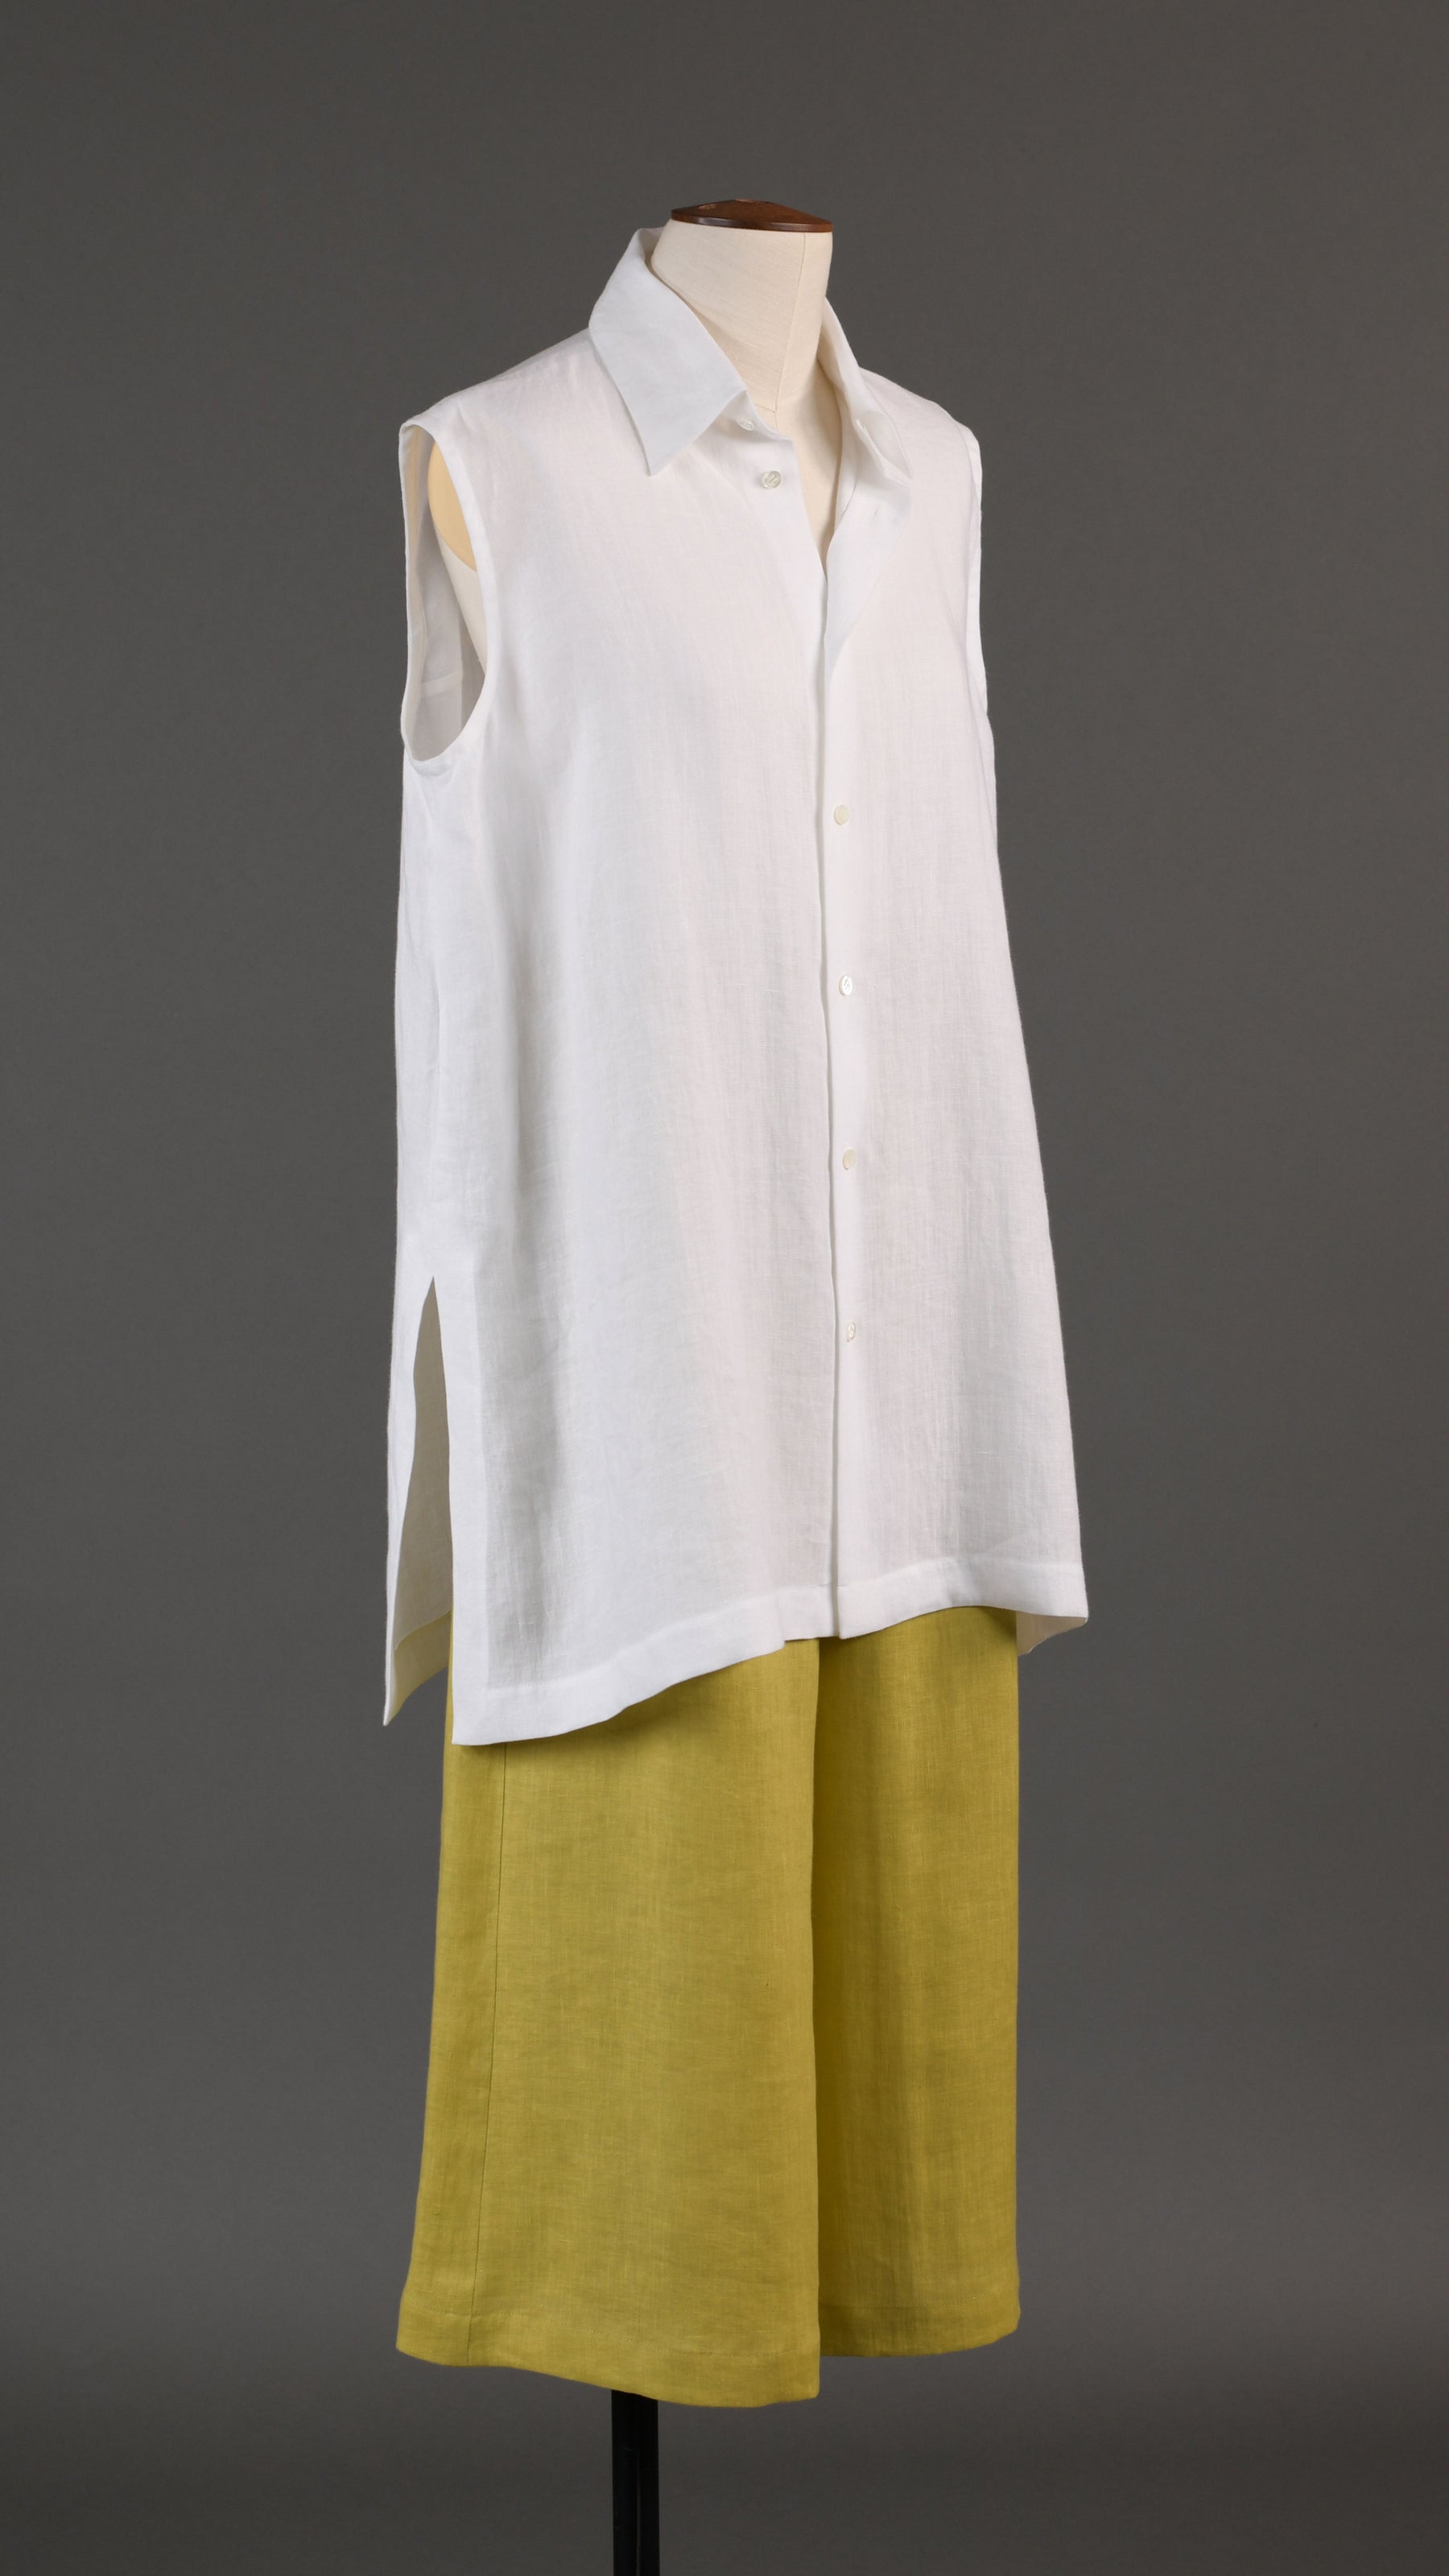 slim a-line sleeveless shirt with collar and side slit detail - long in white